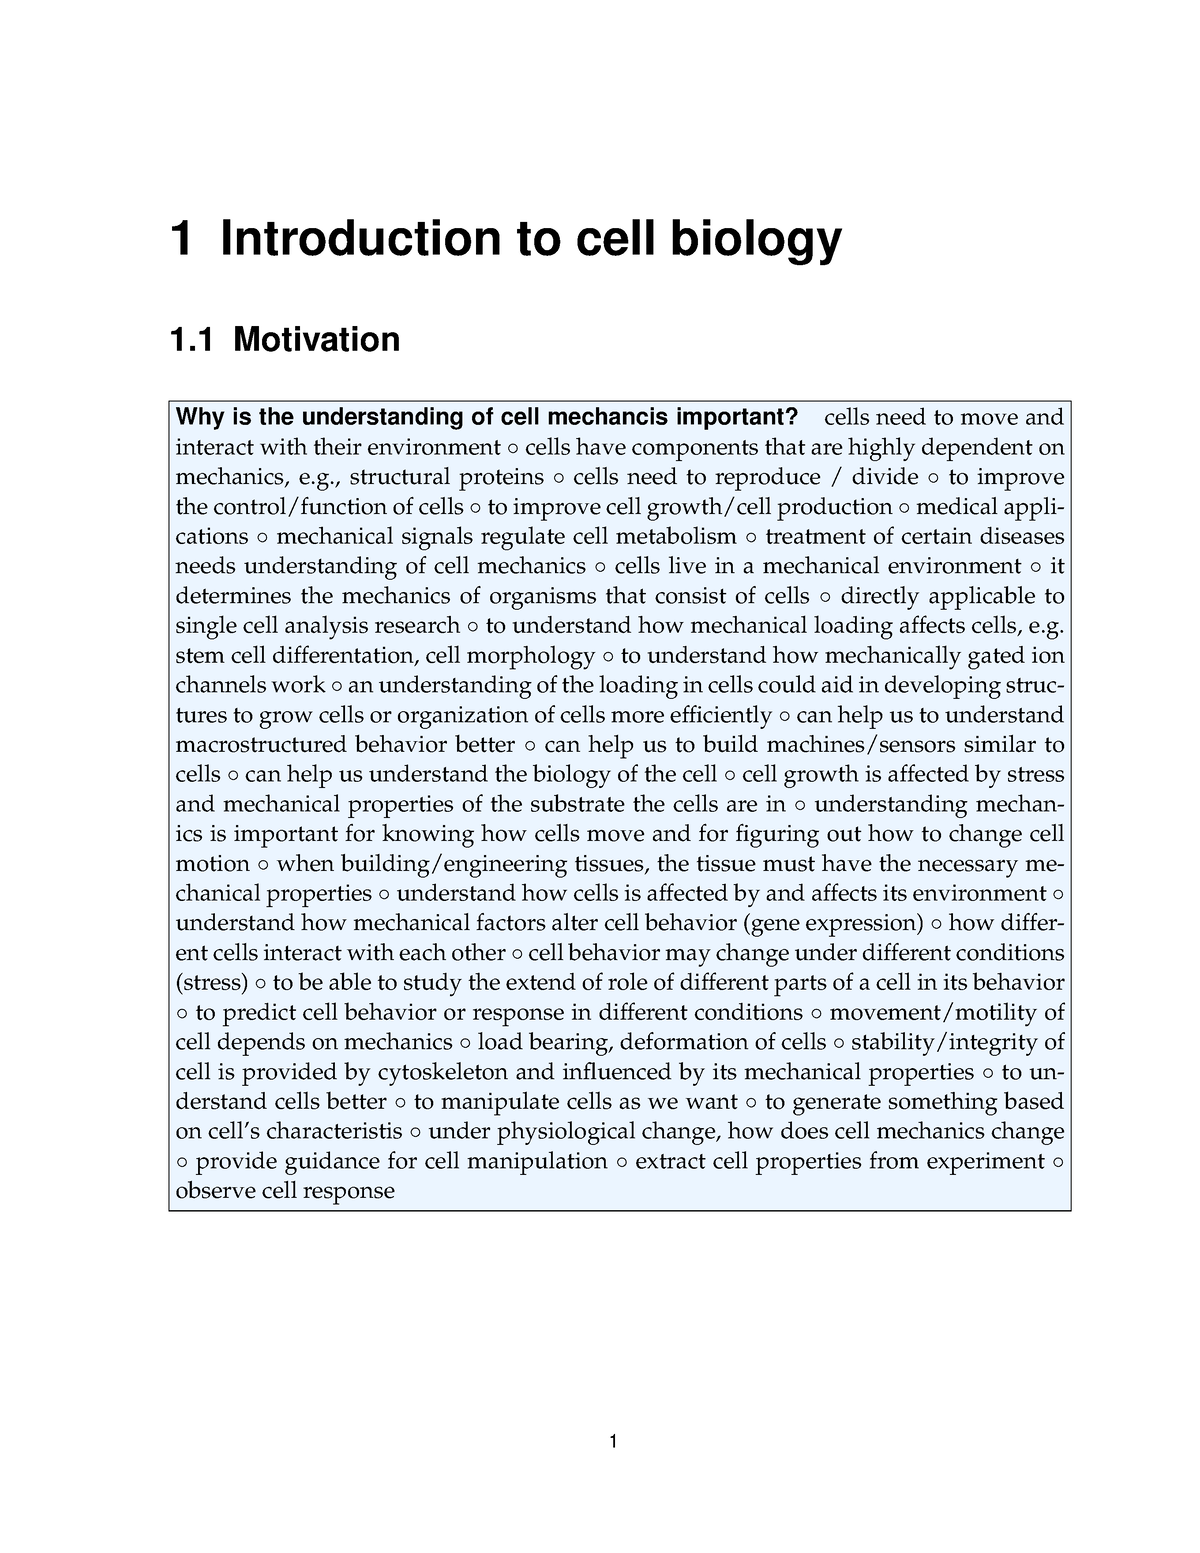 introduction to cell biology assignment